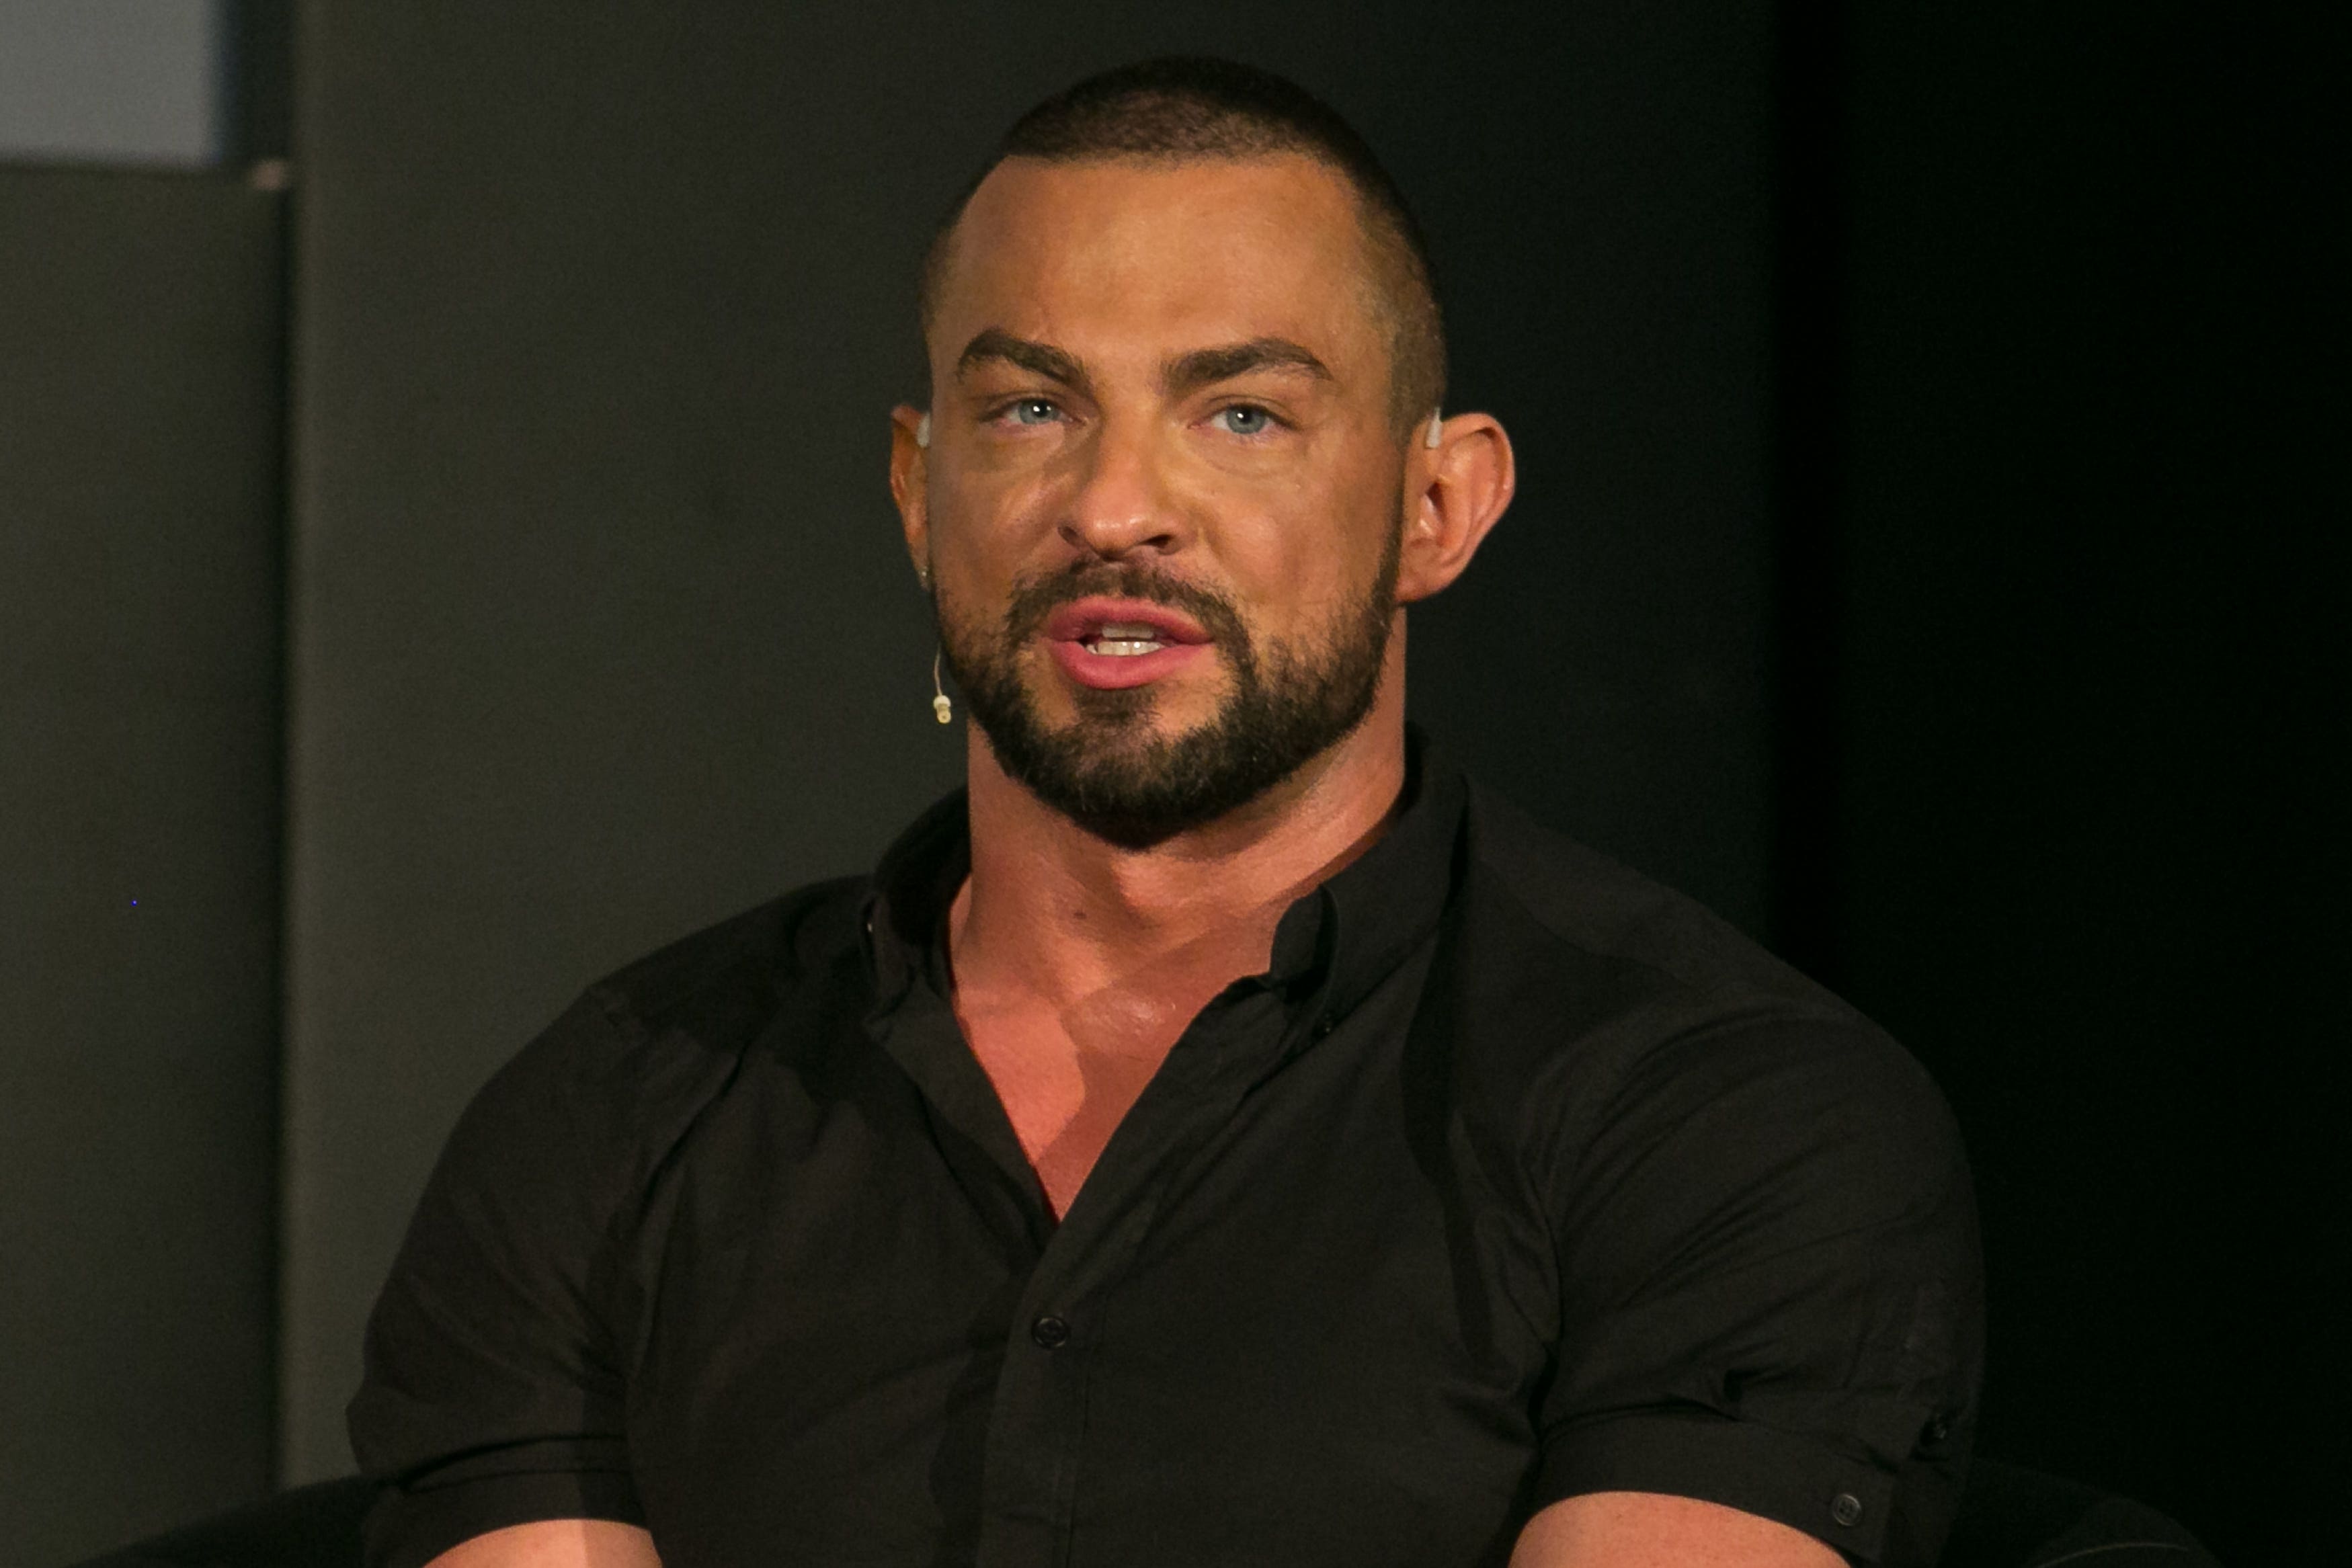 The family of Robin Windsor have thanked fans but asked for speculation about his death to stop